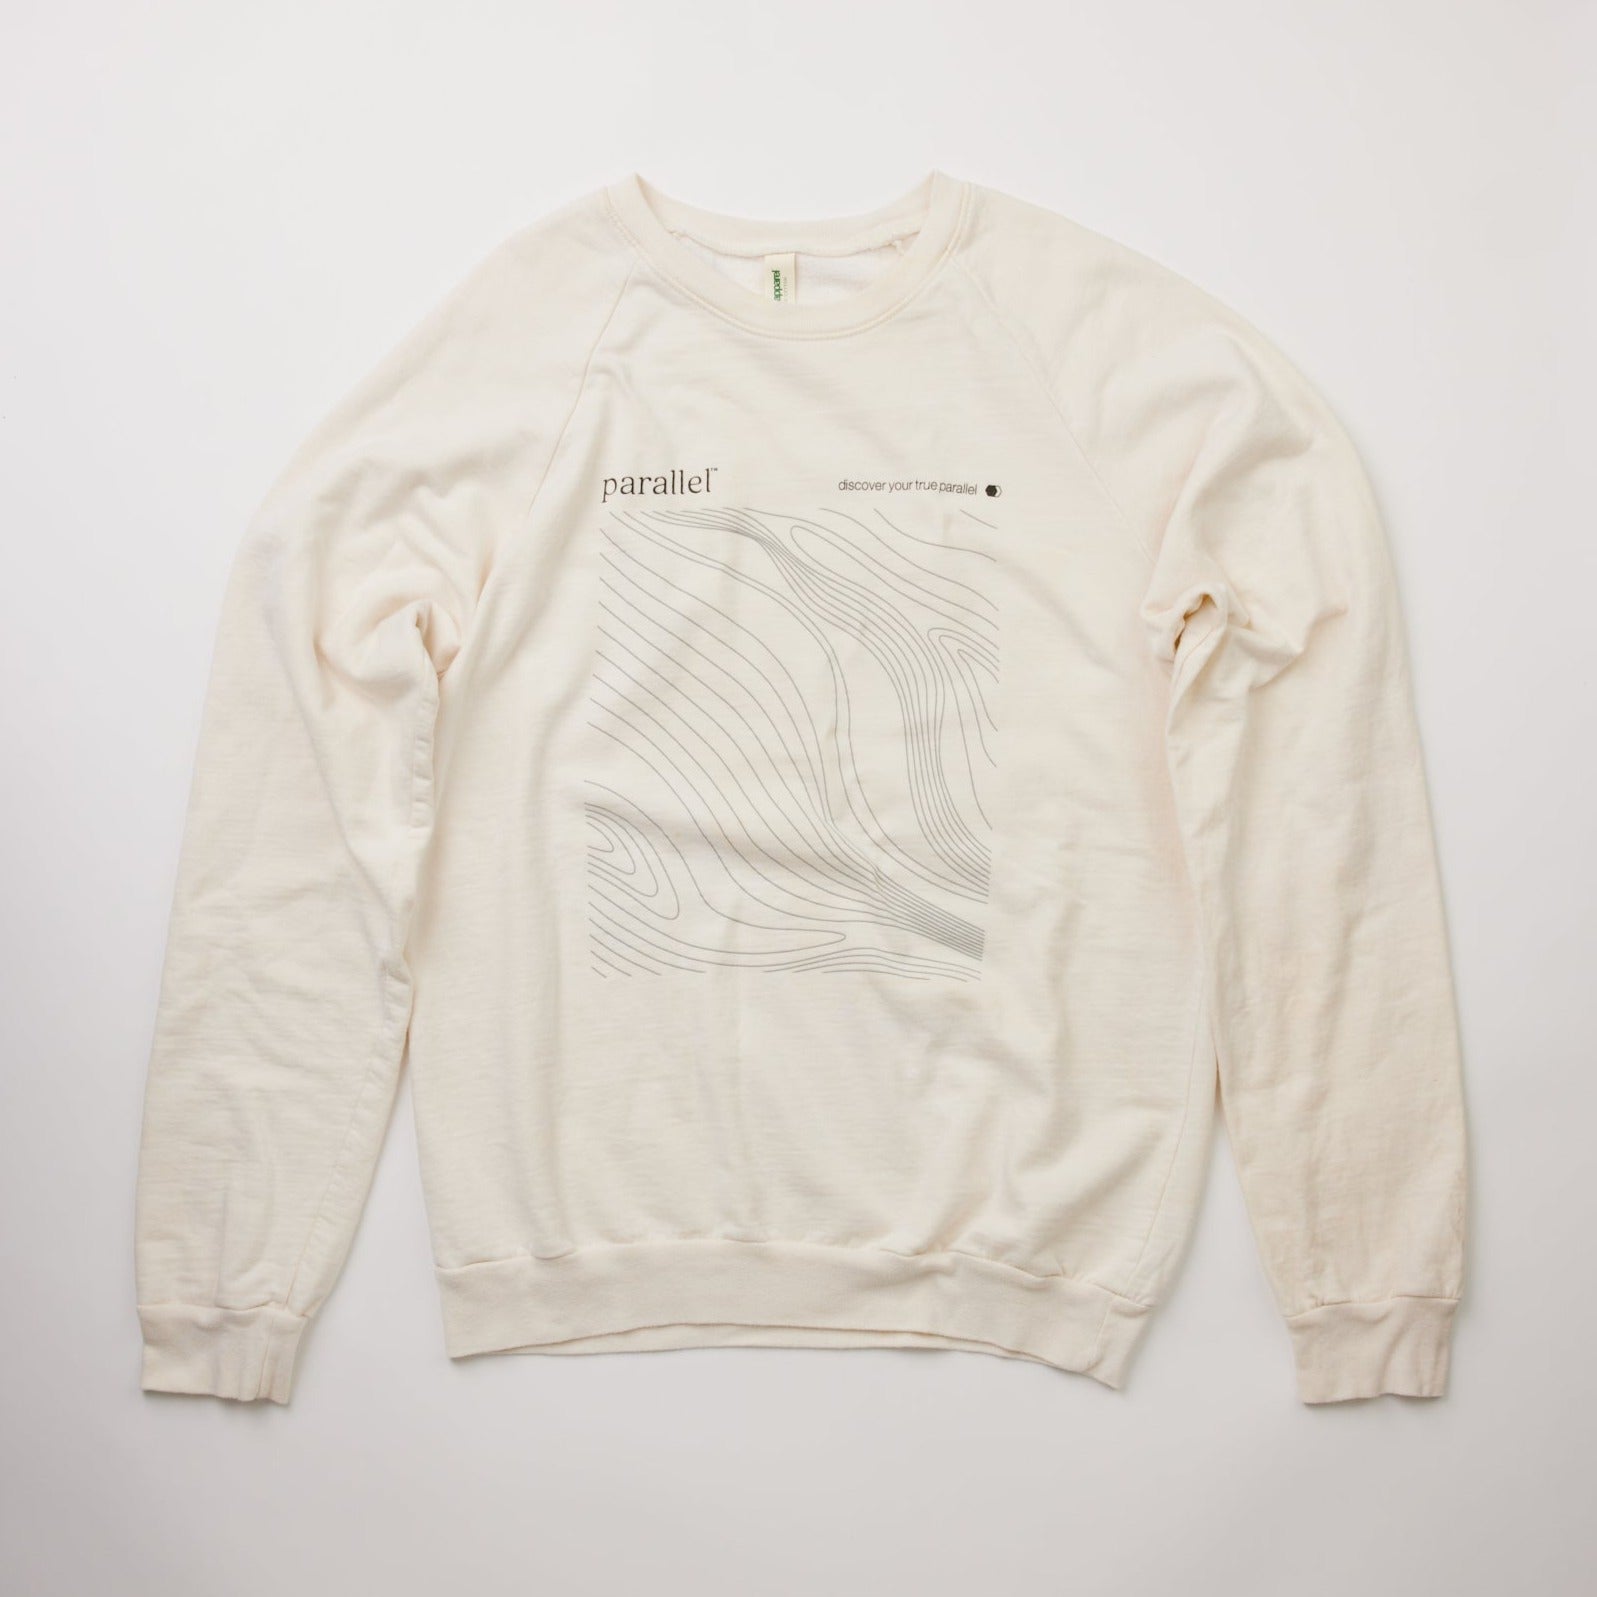 Organic Parallel Classic Crewneck v.1 (limited edition)